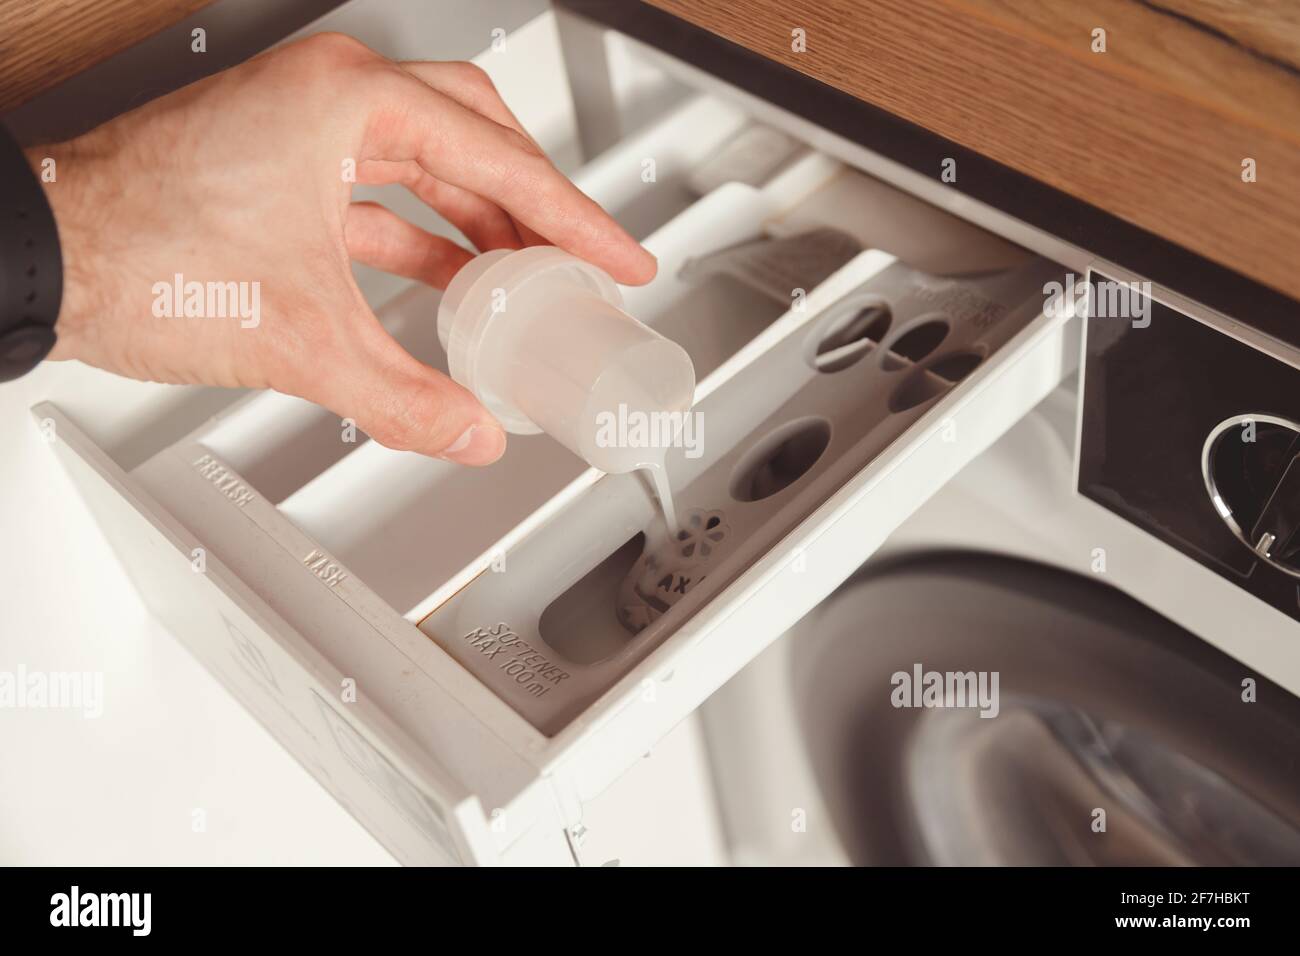 Man pouring the washing fabric conditioner into the washing machine to get more softer clothes Stock Photo